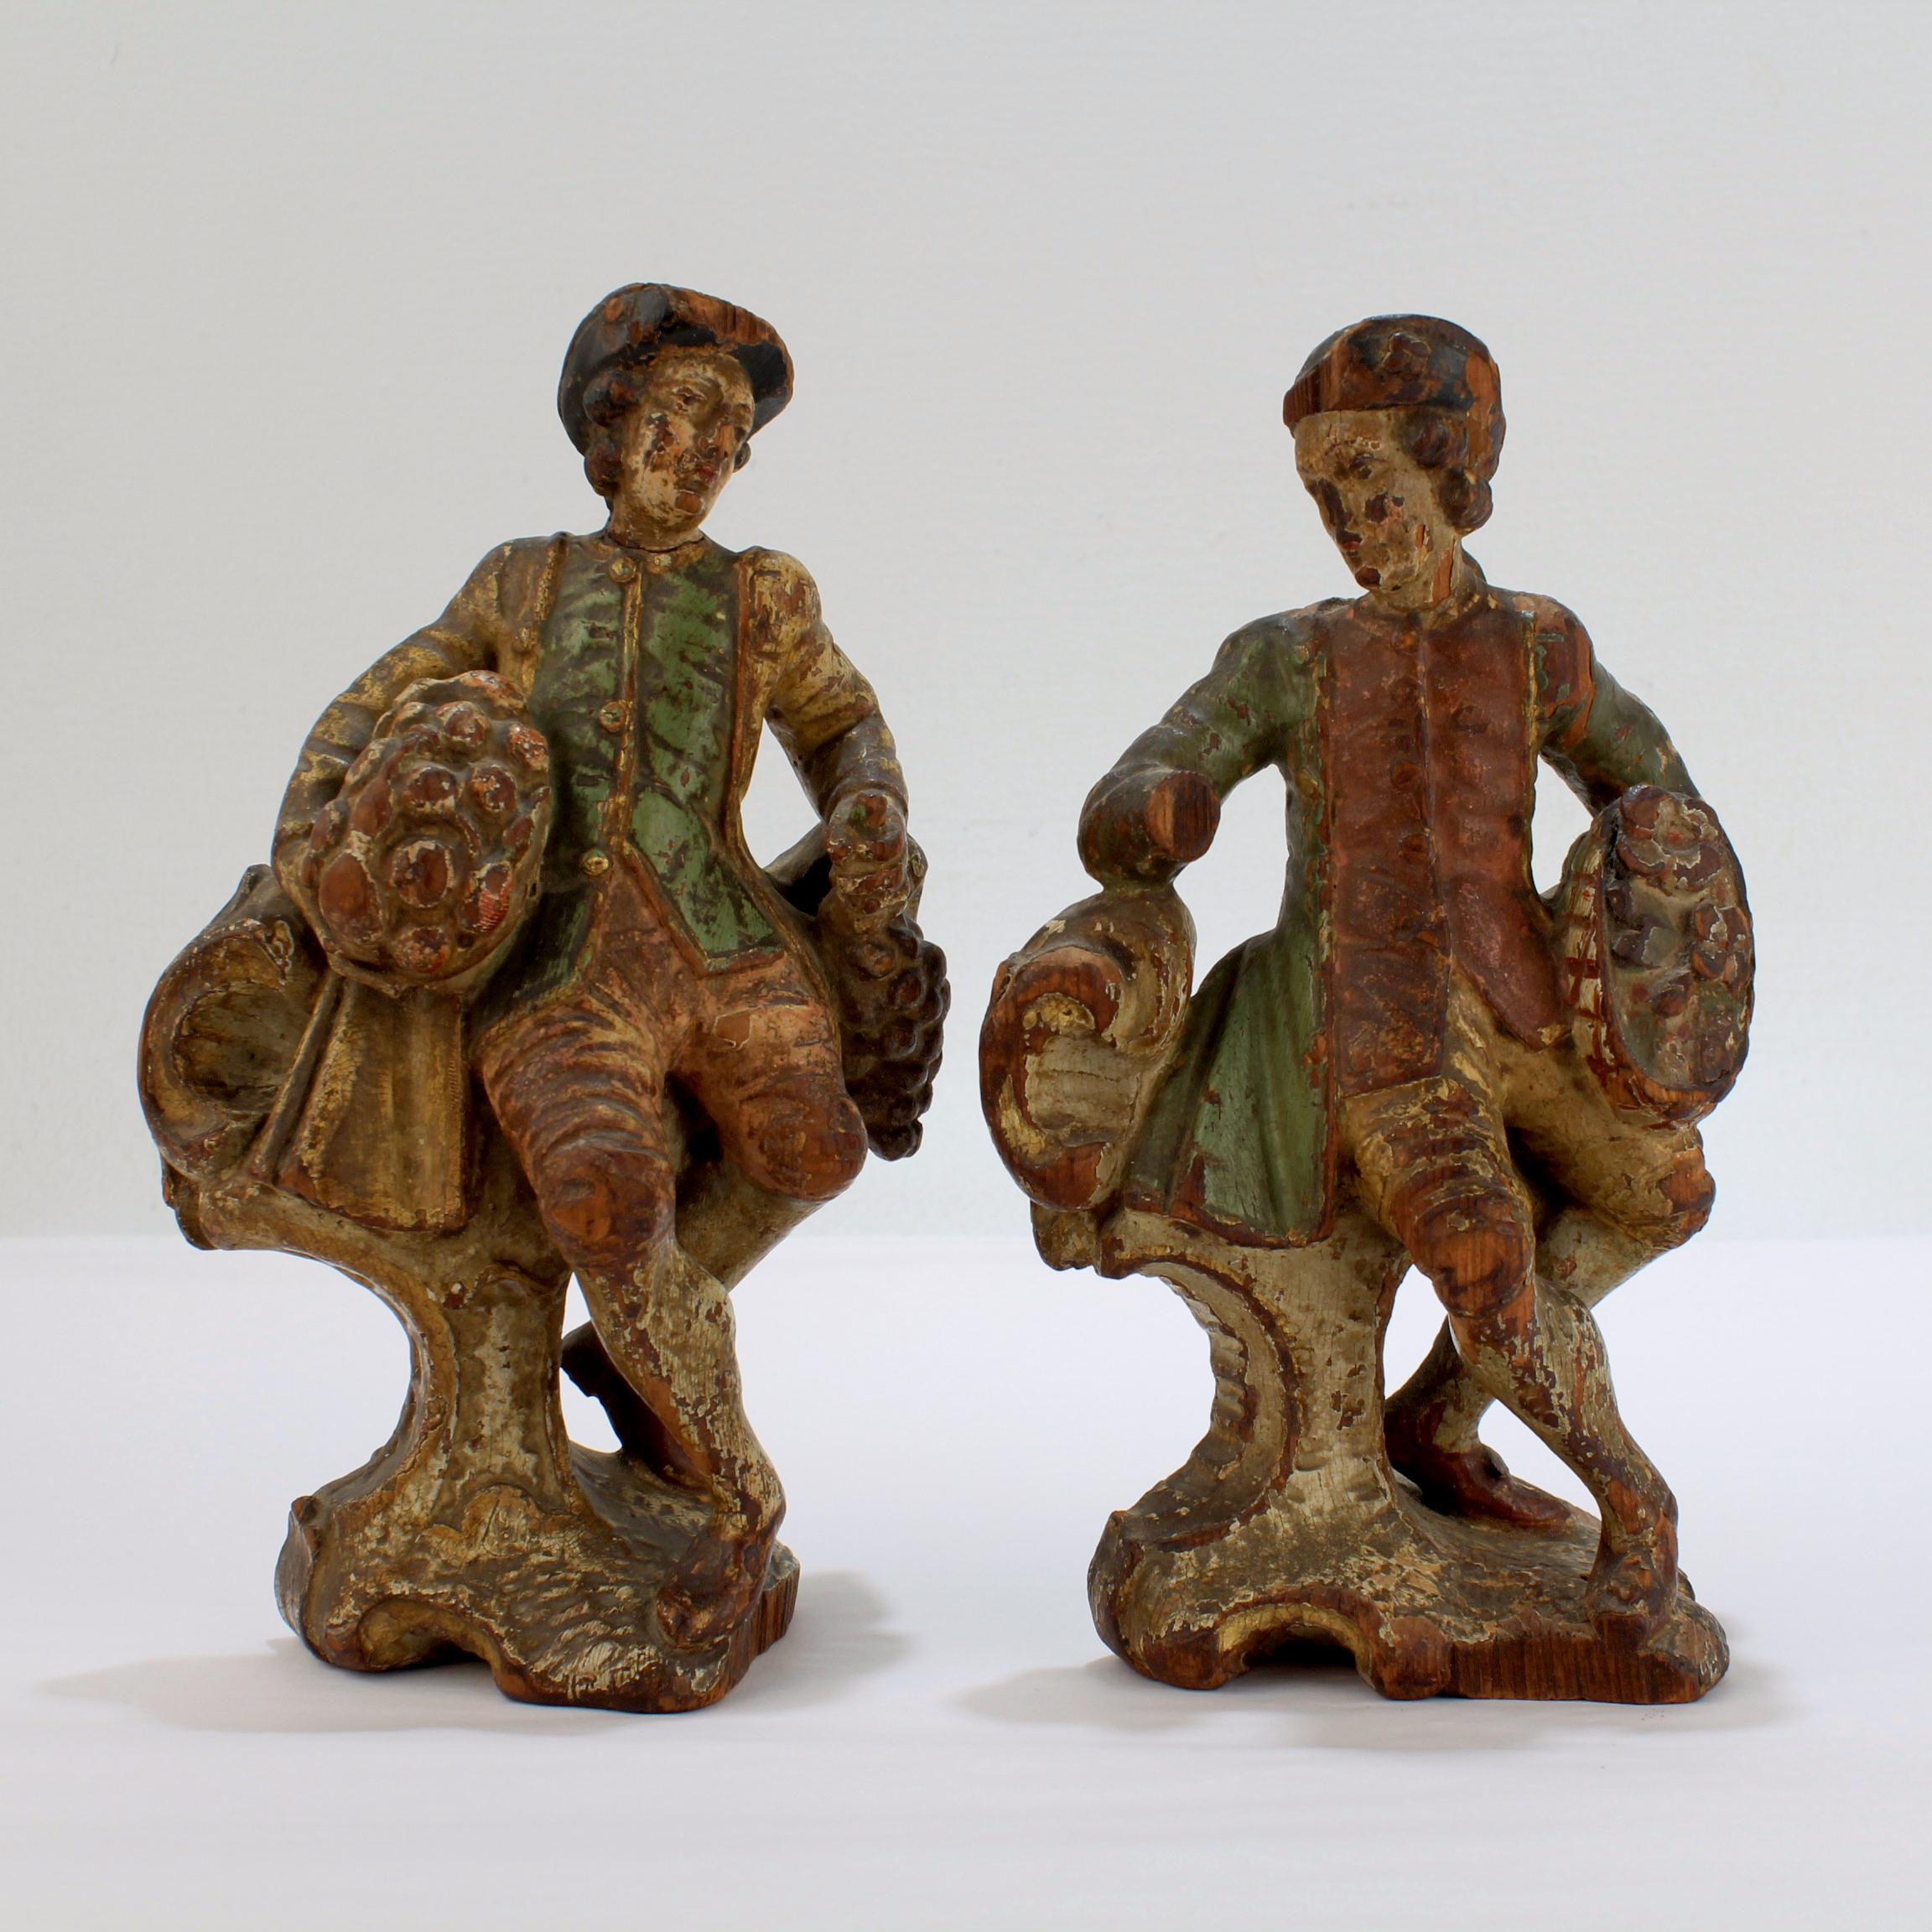 A pair of 18th century carved wooden figurines

Likely Central European originating somewhere in Germany, Austria, Switzerland, or Northern Italy. 

Both figurines depict a gallant gentleman in period dress holding a basket replete with fruit or